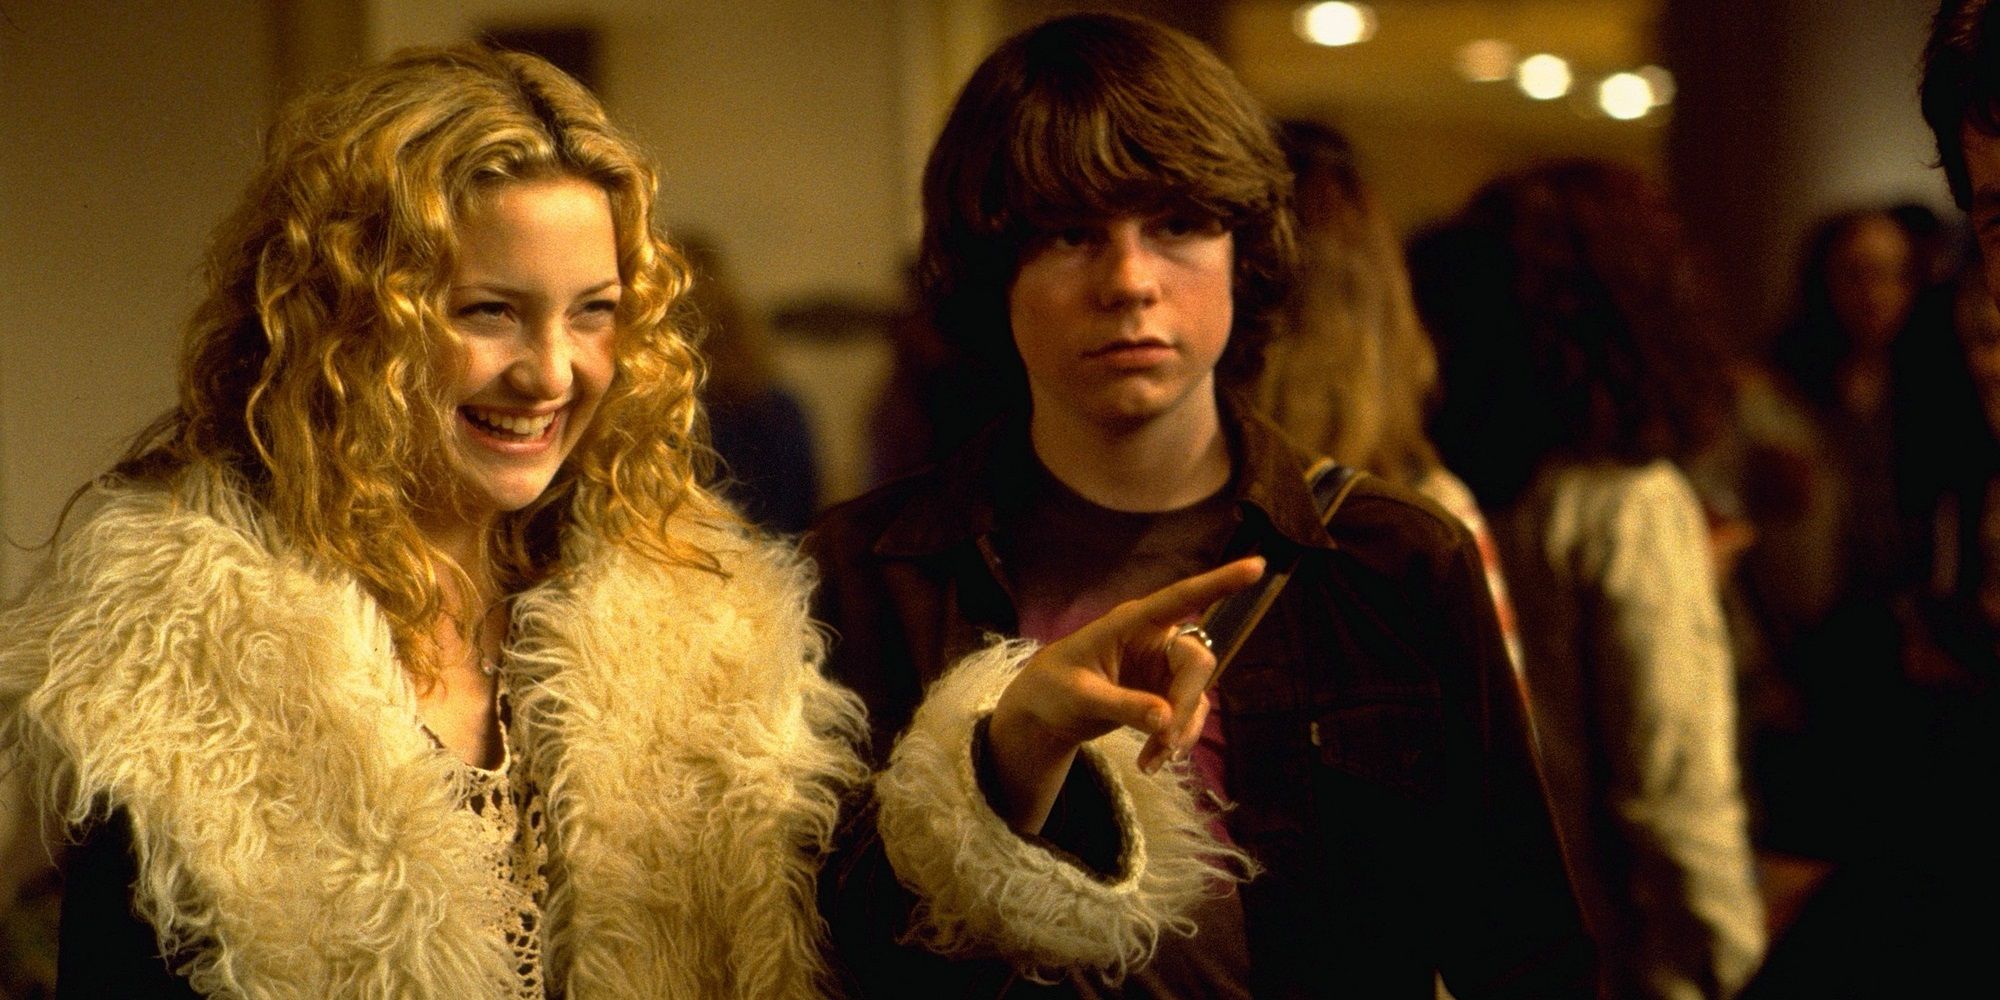 Penny and William in Almost Famous